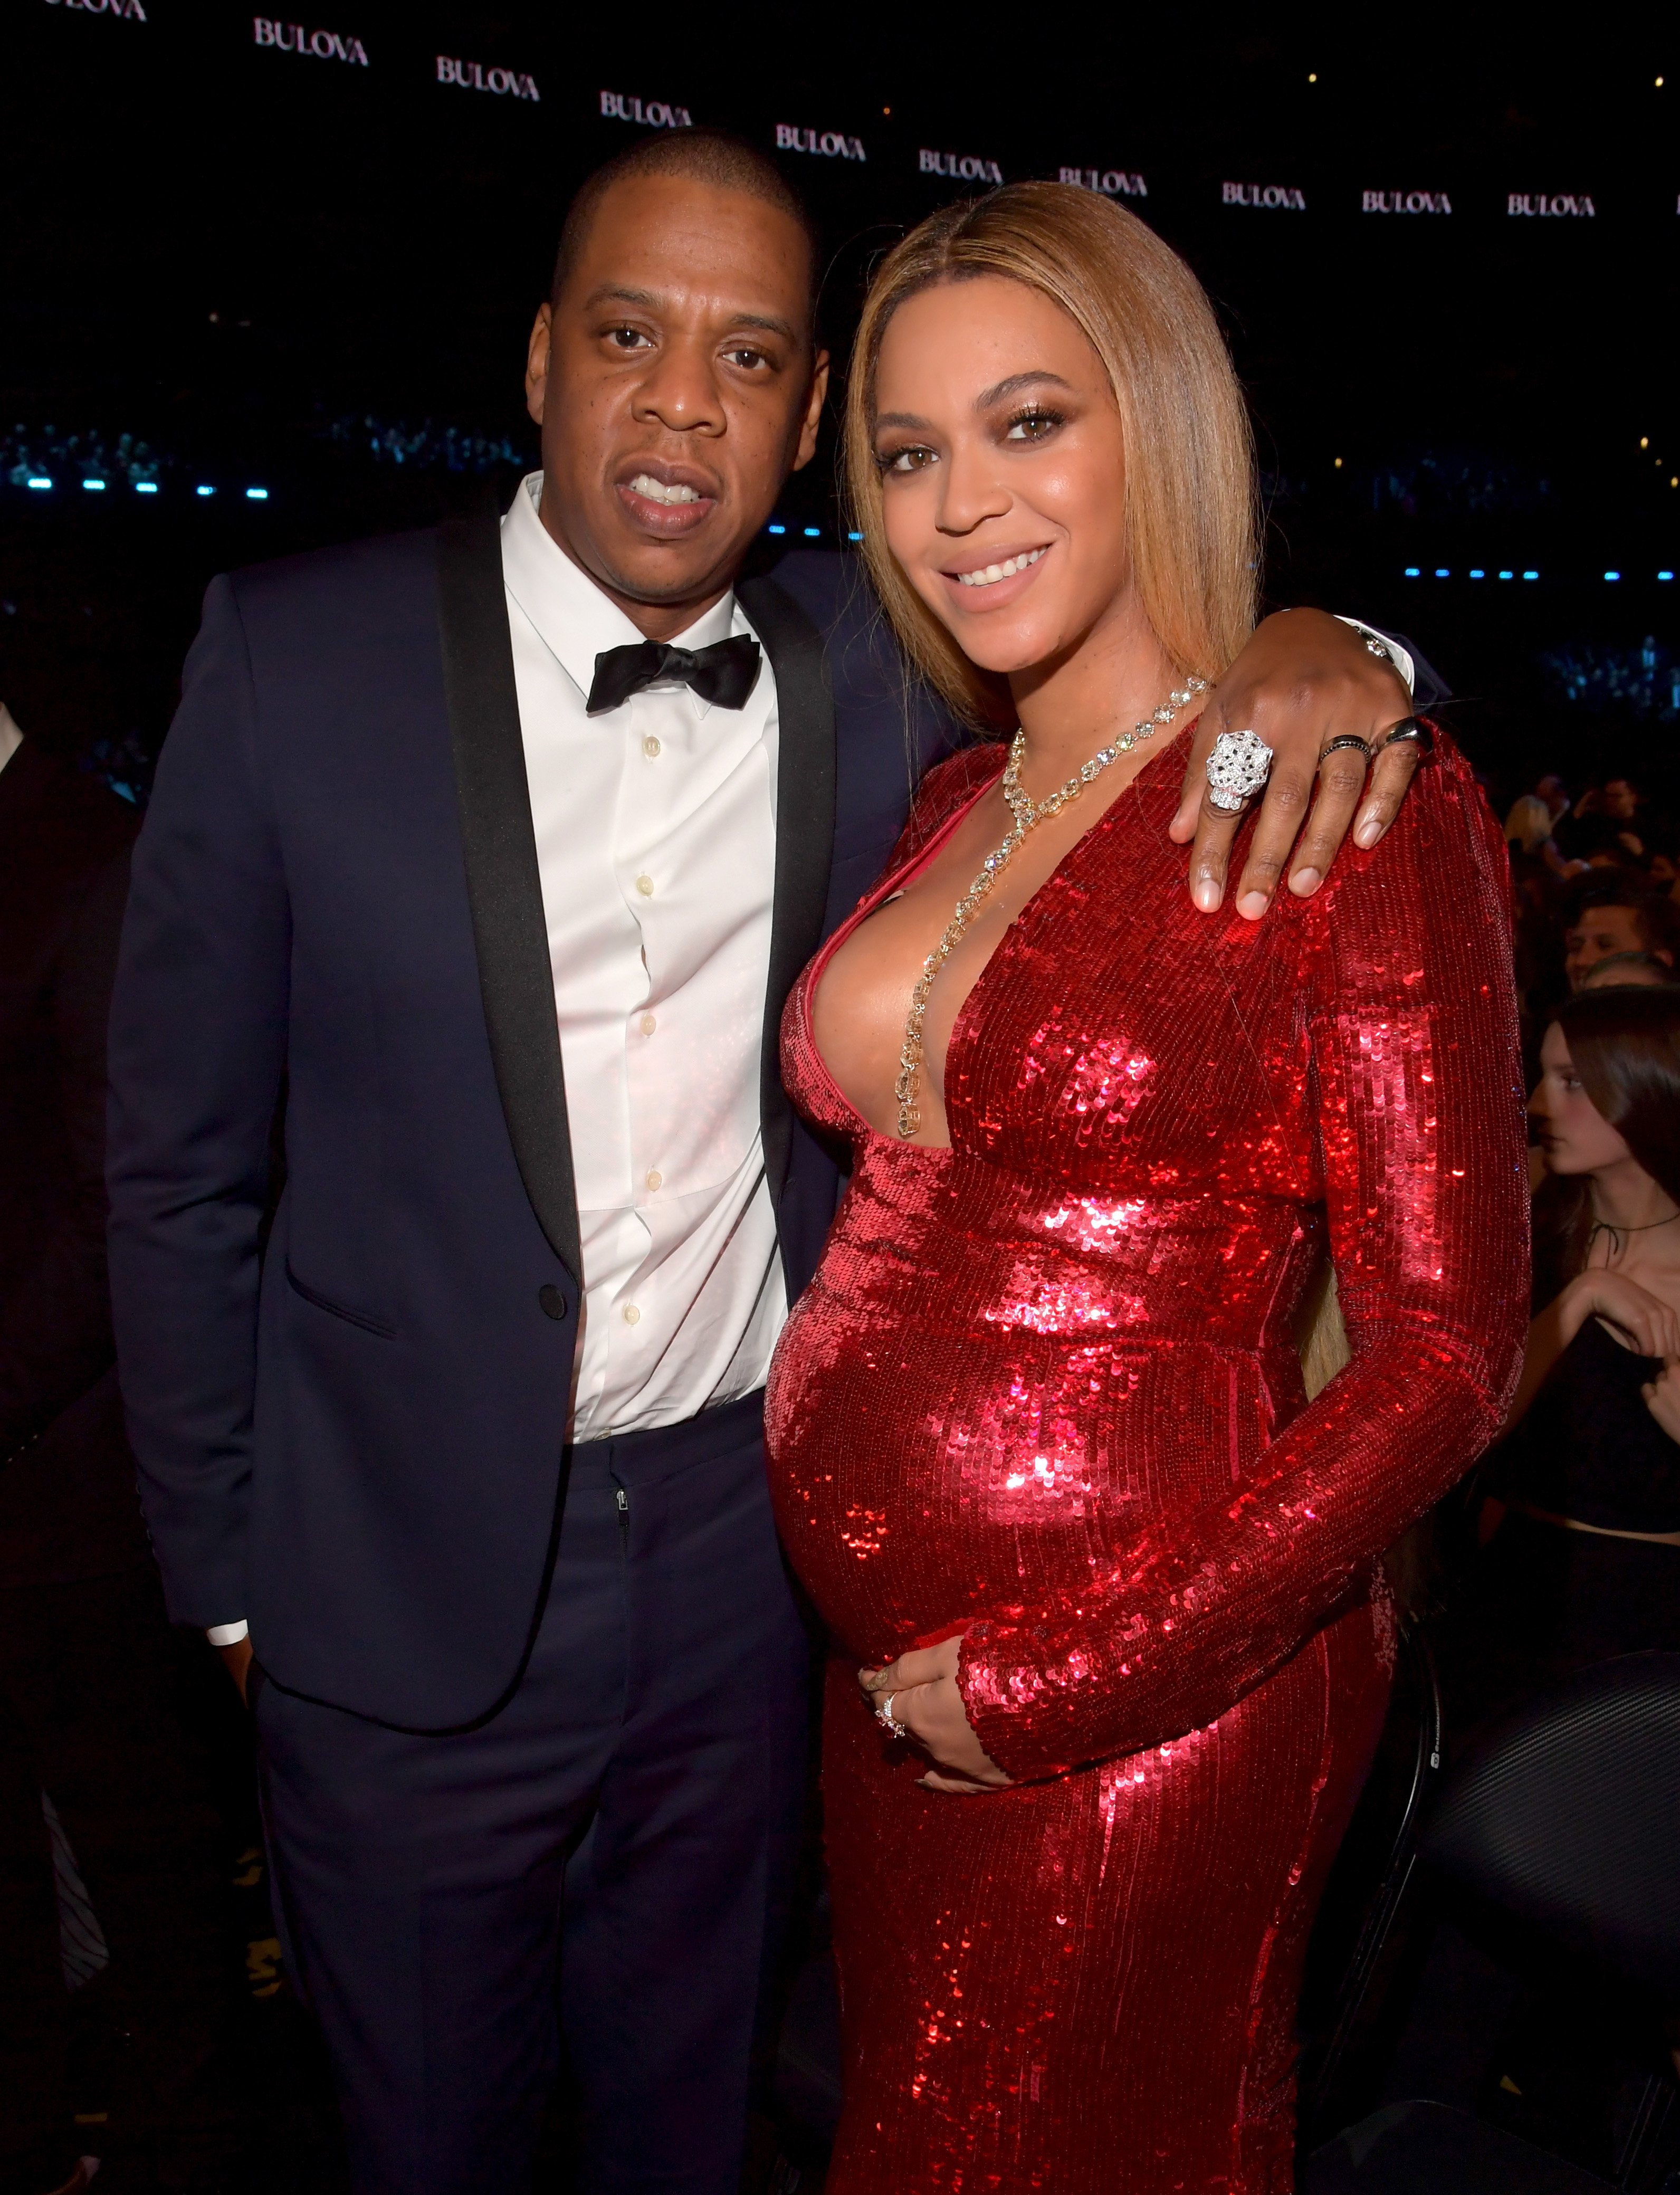 Jay Z and Beyoncé attend The 59th Grammy Awards at Staples Center on February 12, 2017 in Los Angeles, California l Source: Getty Images